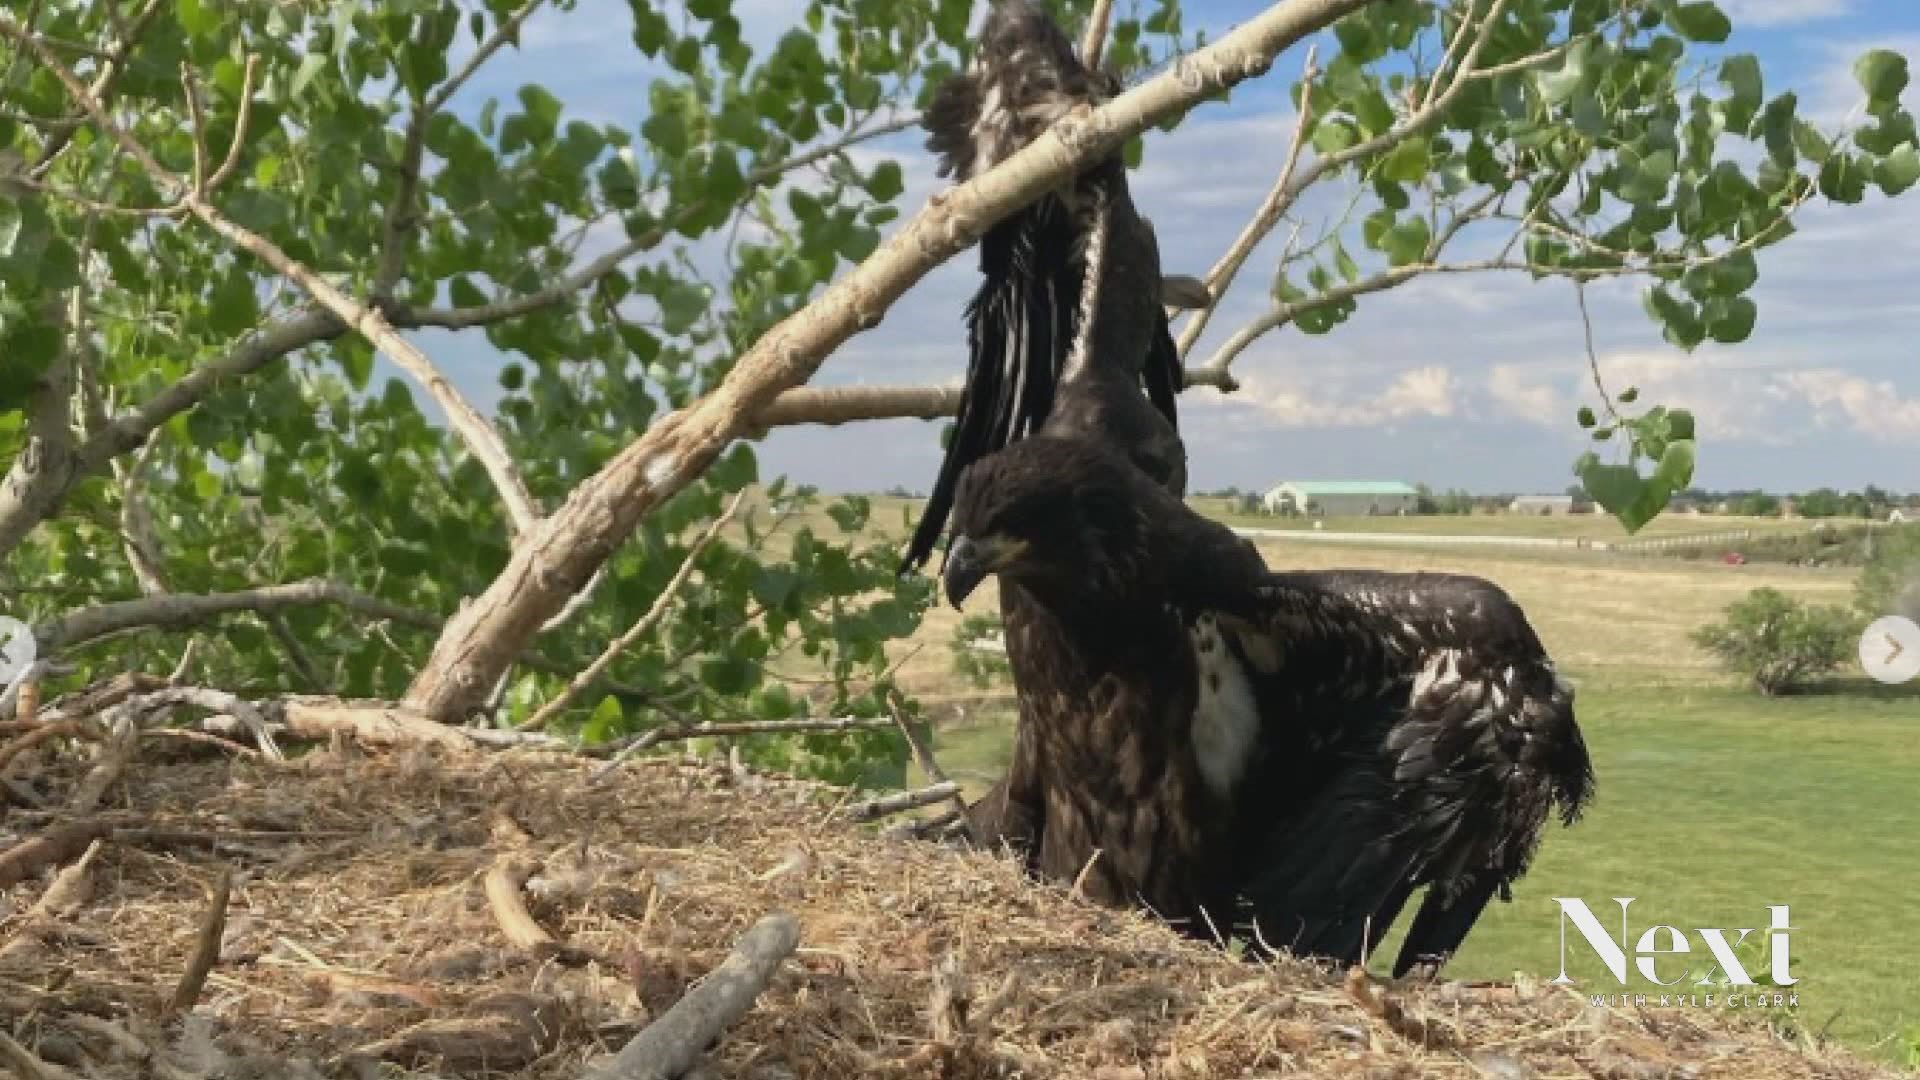 An arborist from Berthoud helped rescue a bald eagle that impaled a wing from inside its nest. Andy Harem climbed the 70 ft. tree a freed the eaglet from a branch.